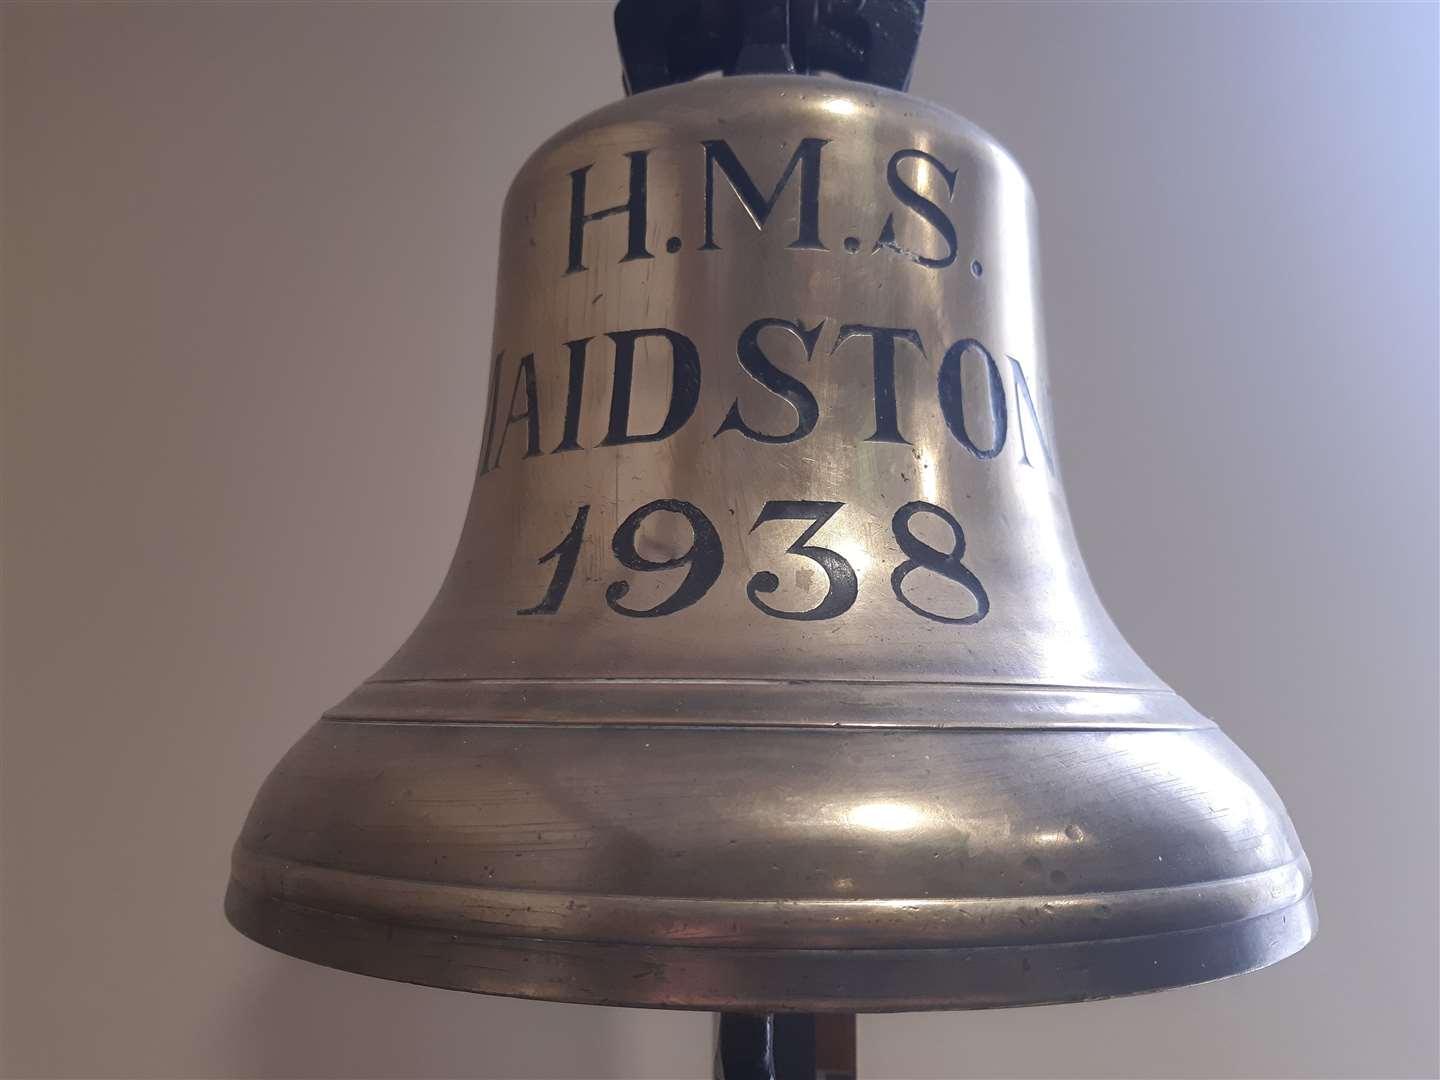 The bell from HMS Maidstone now hangs in Maidstone Town Hall